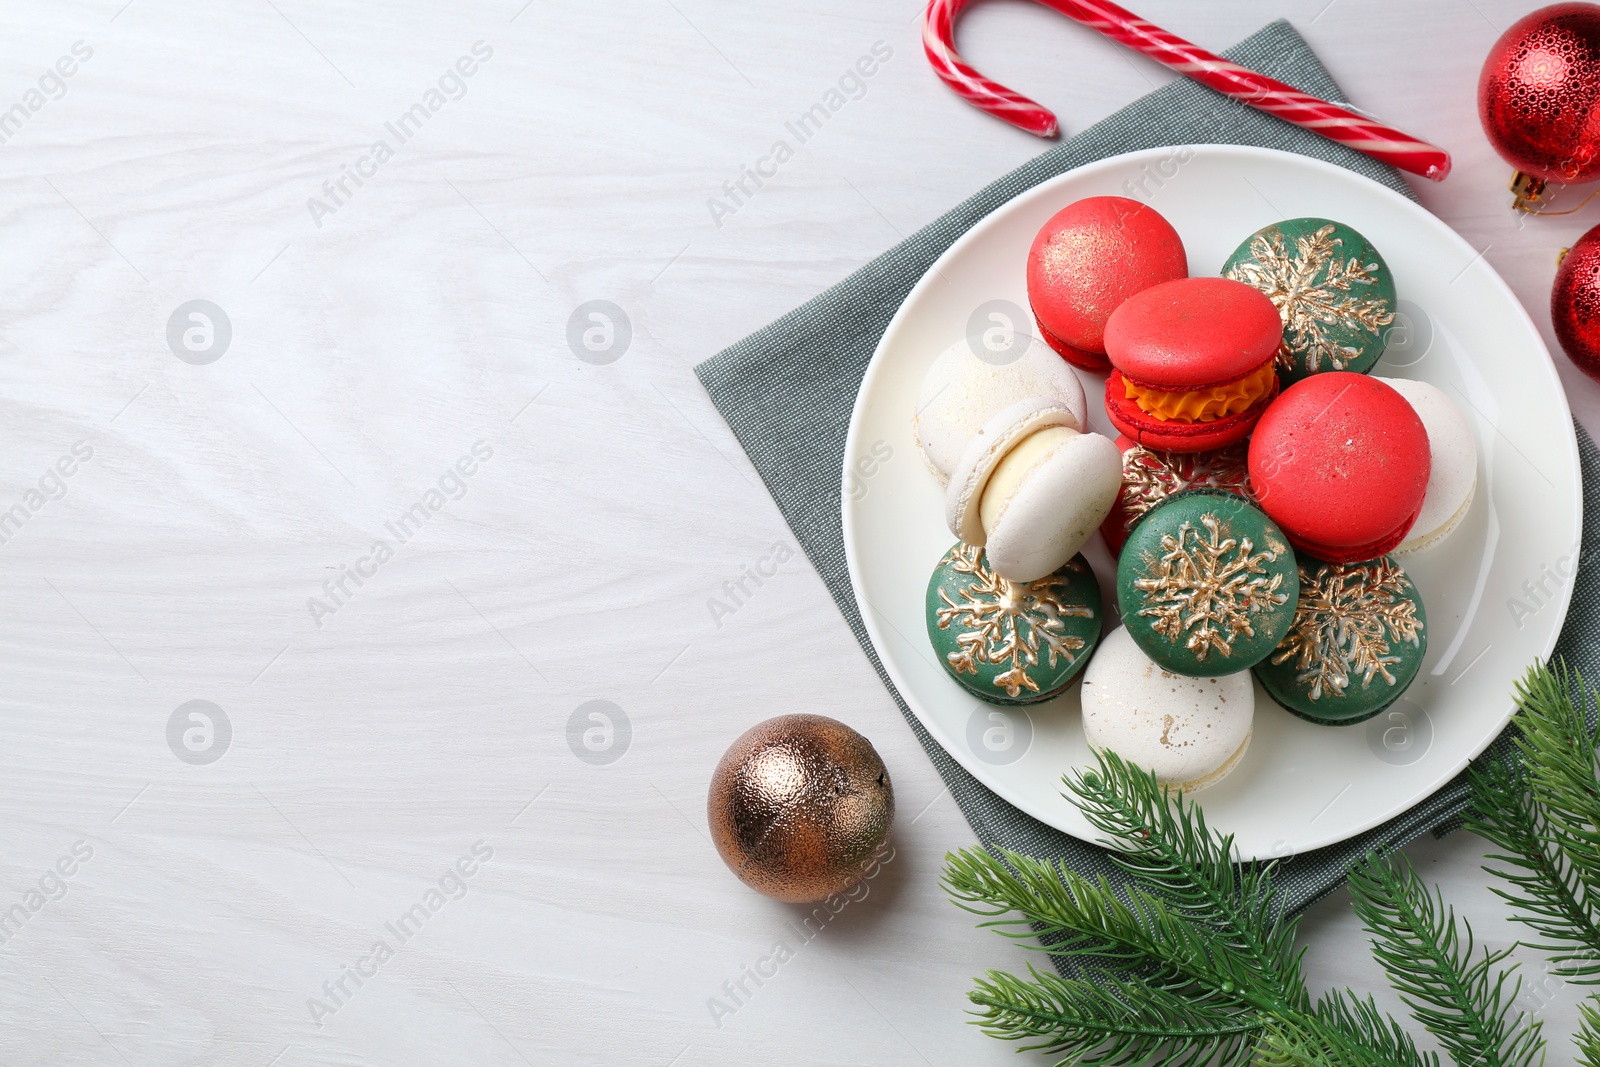 Photo of Different decorated Christmas macarons and festive decor on white wooden table, flat lay. Space for text